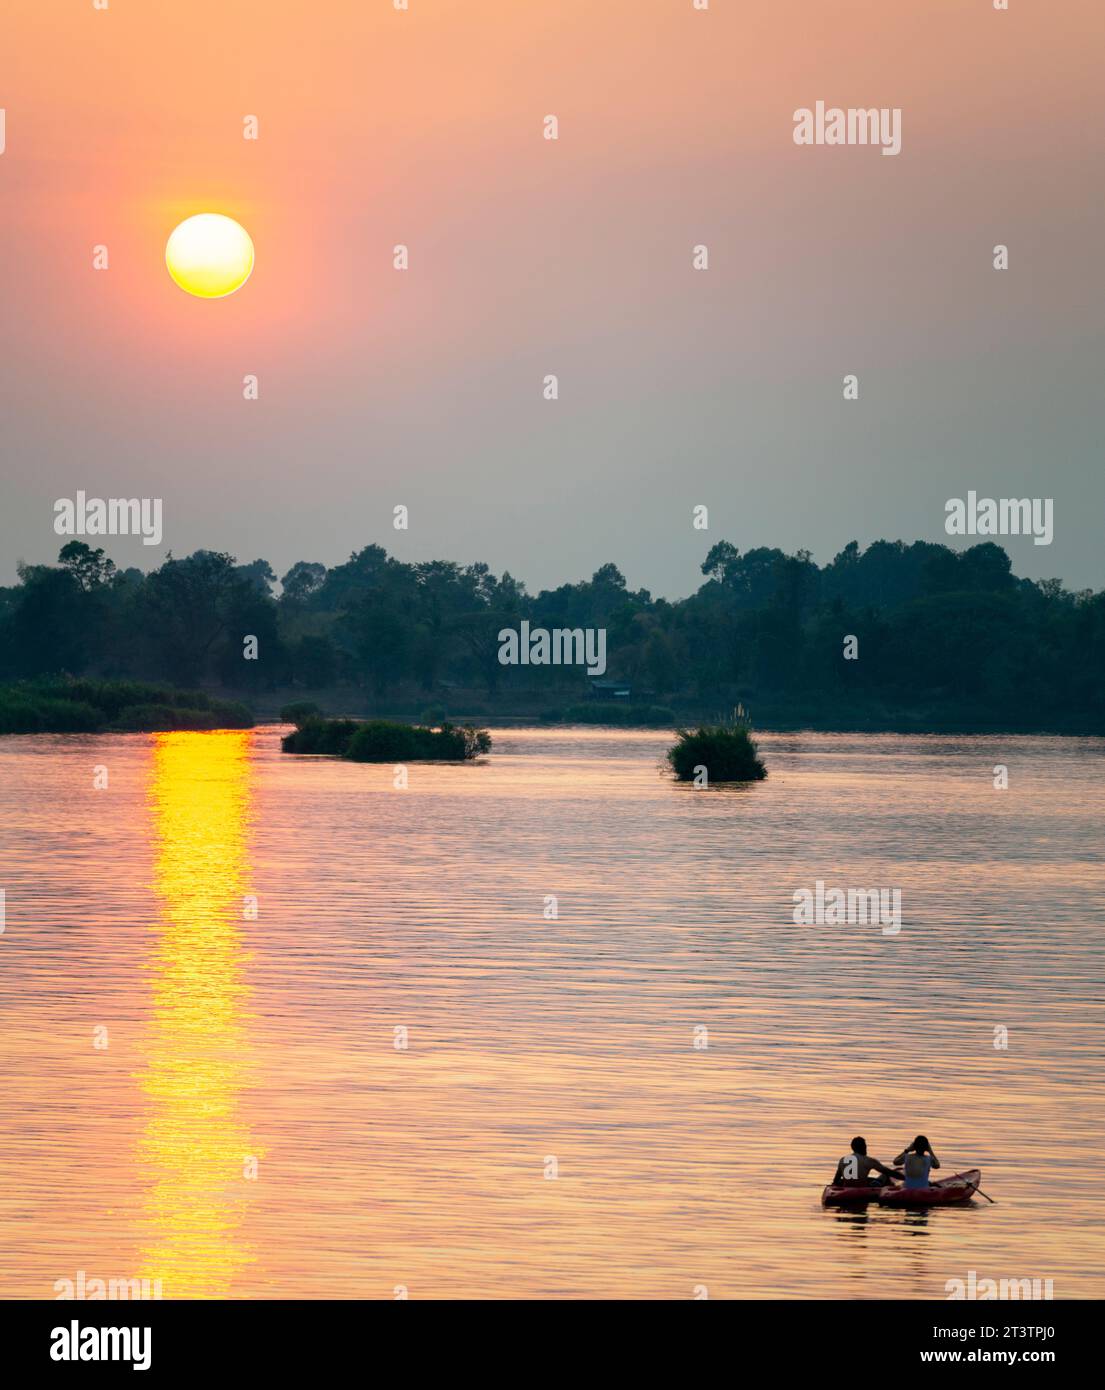 Silhouettes of two human figures in Kayaks,drifting across the calm,peaceful waters of the Mekong,through rays of golden light reflected on the water, Stock Photo